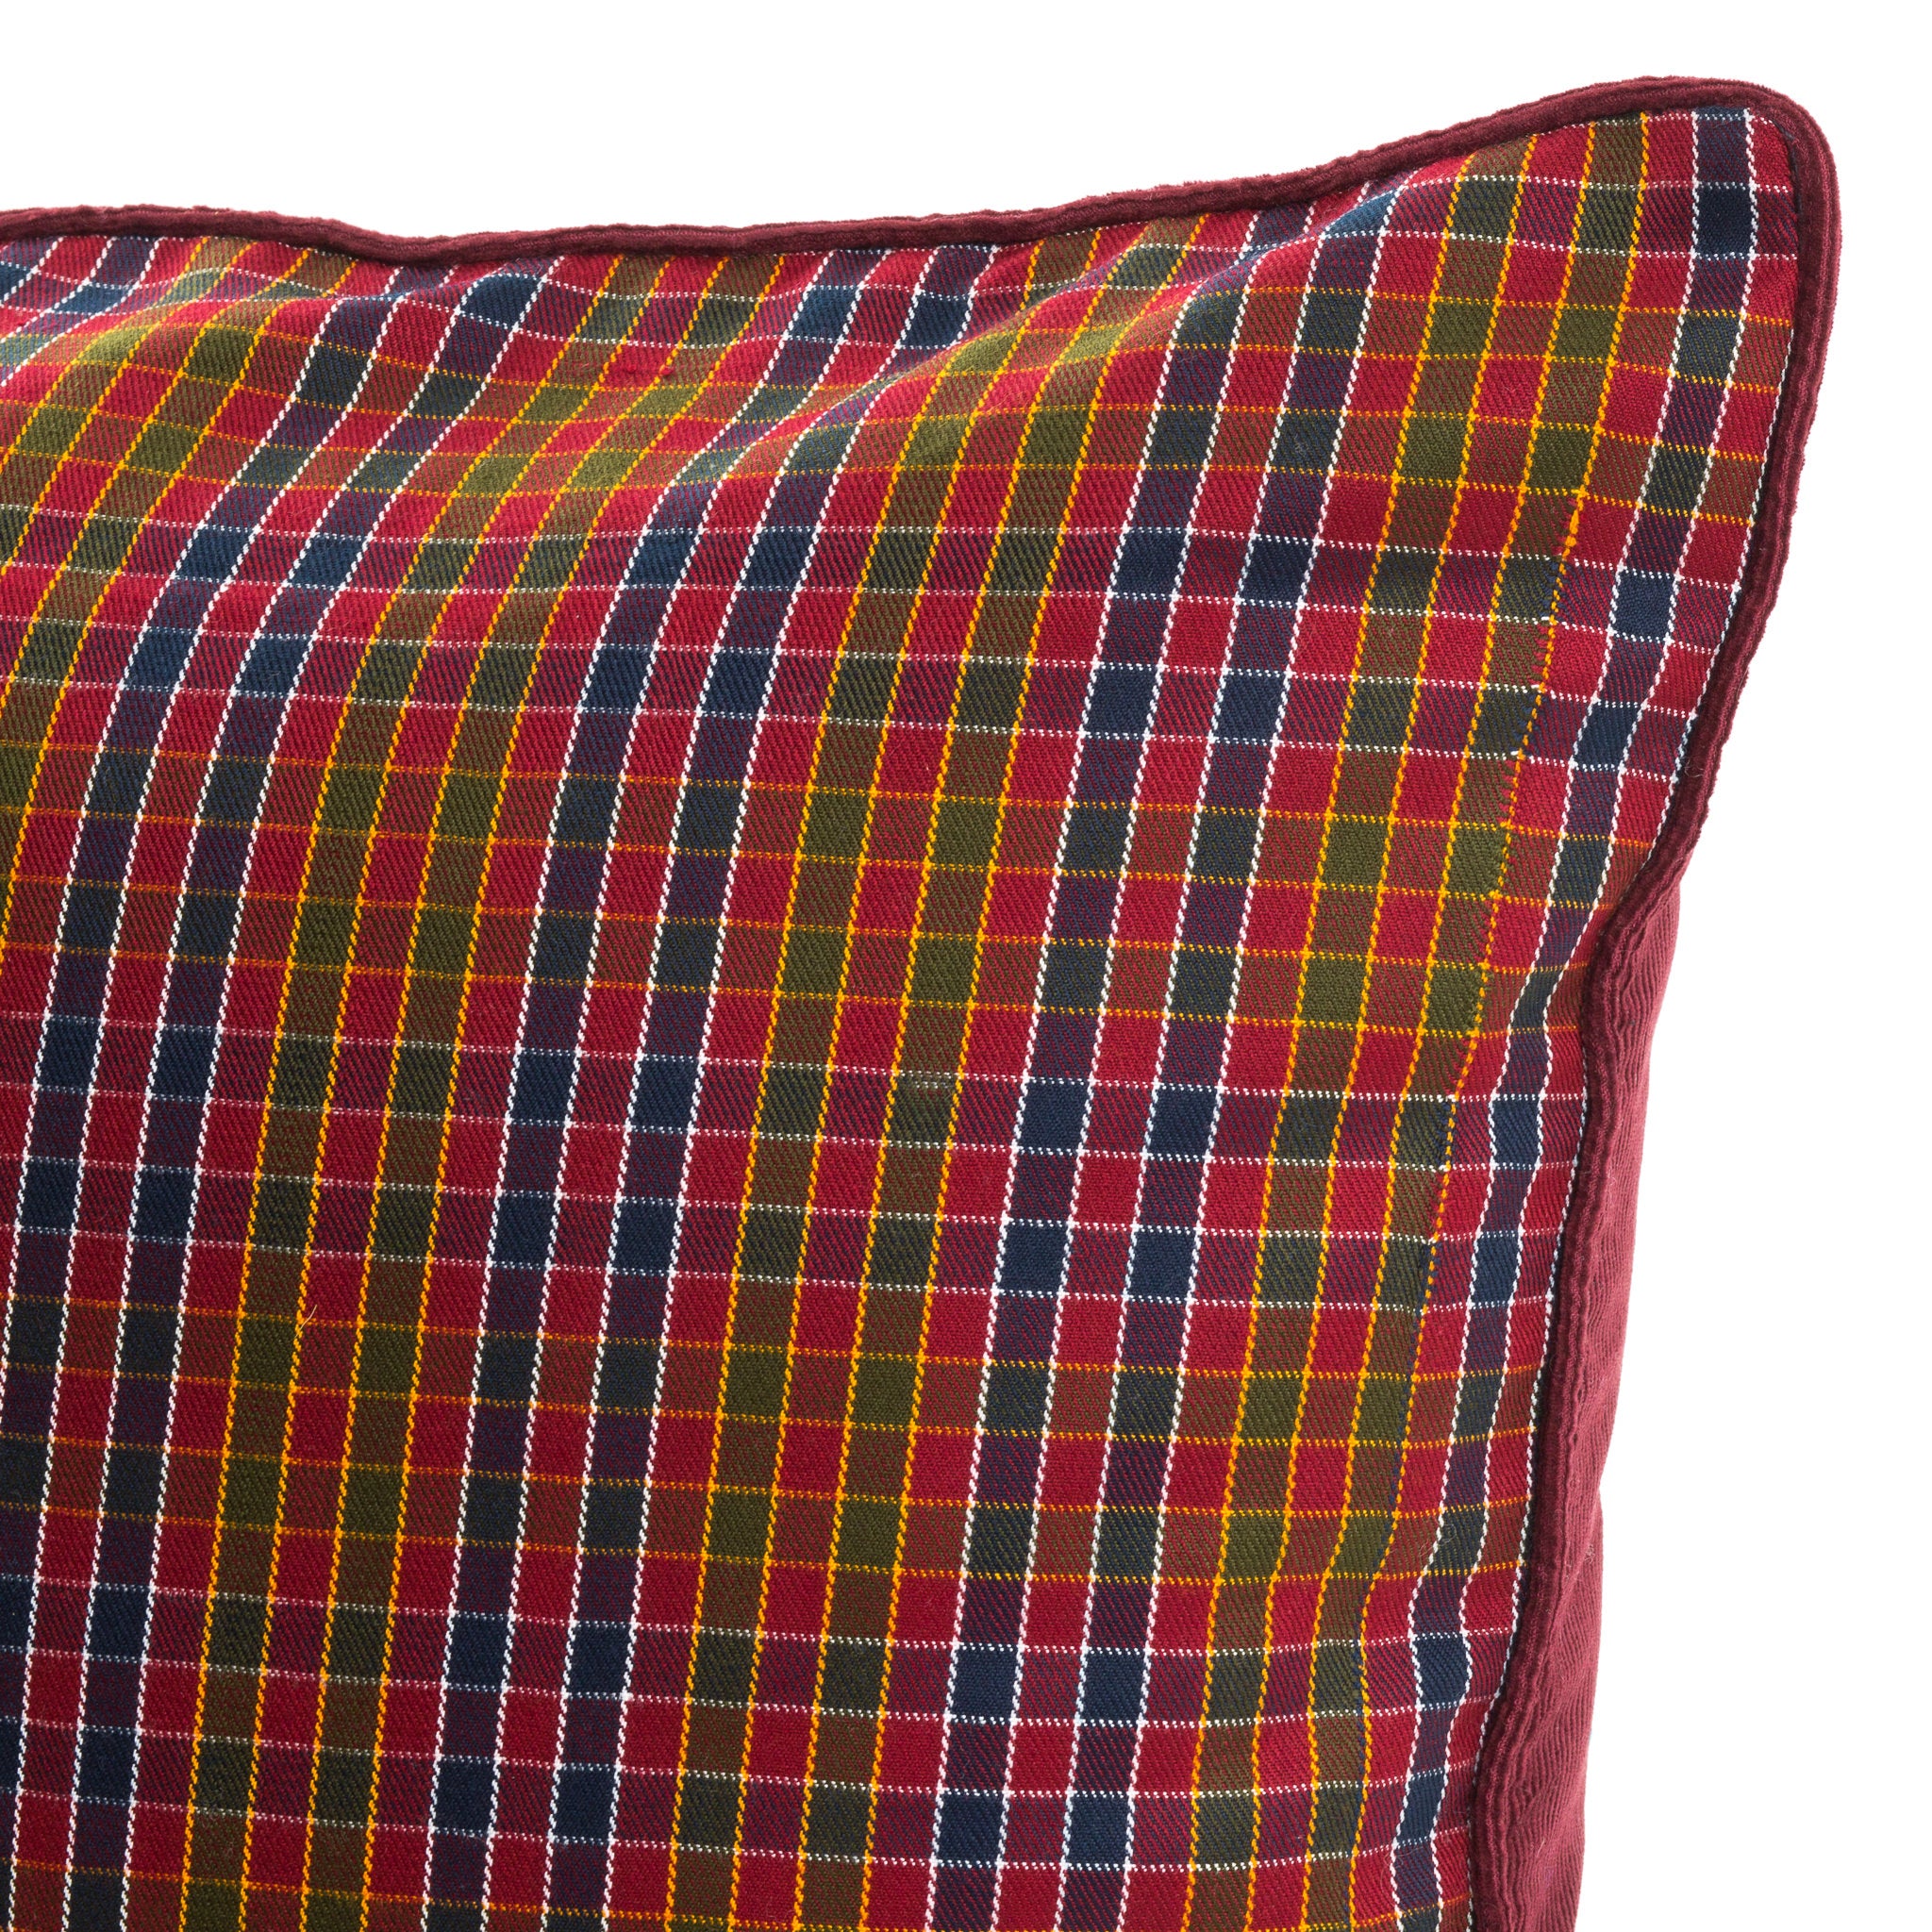 Burgundy Red and Blue Checked Handwoven Square / Scatter Cushion from Bhutan - DETAIL